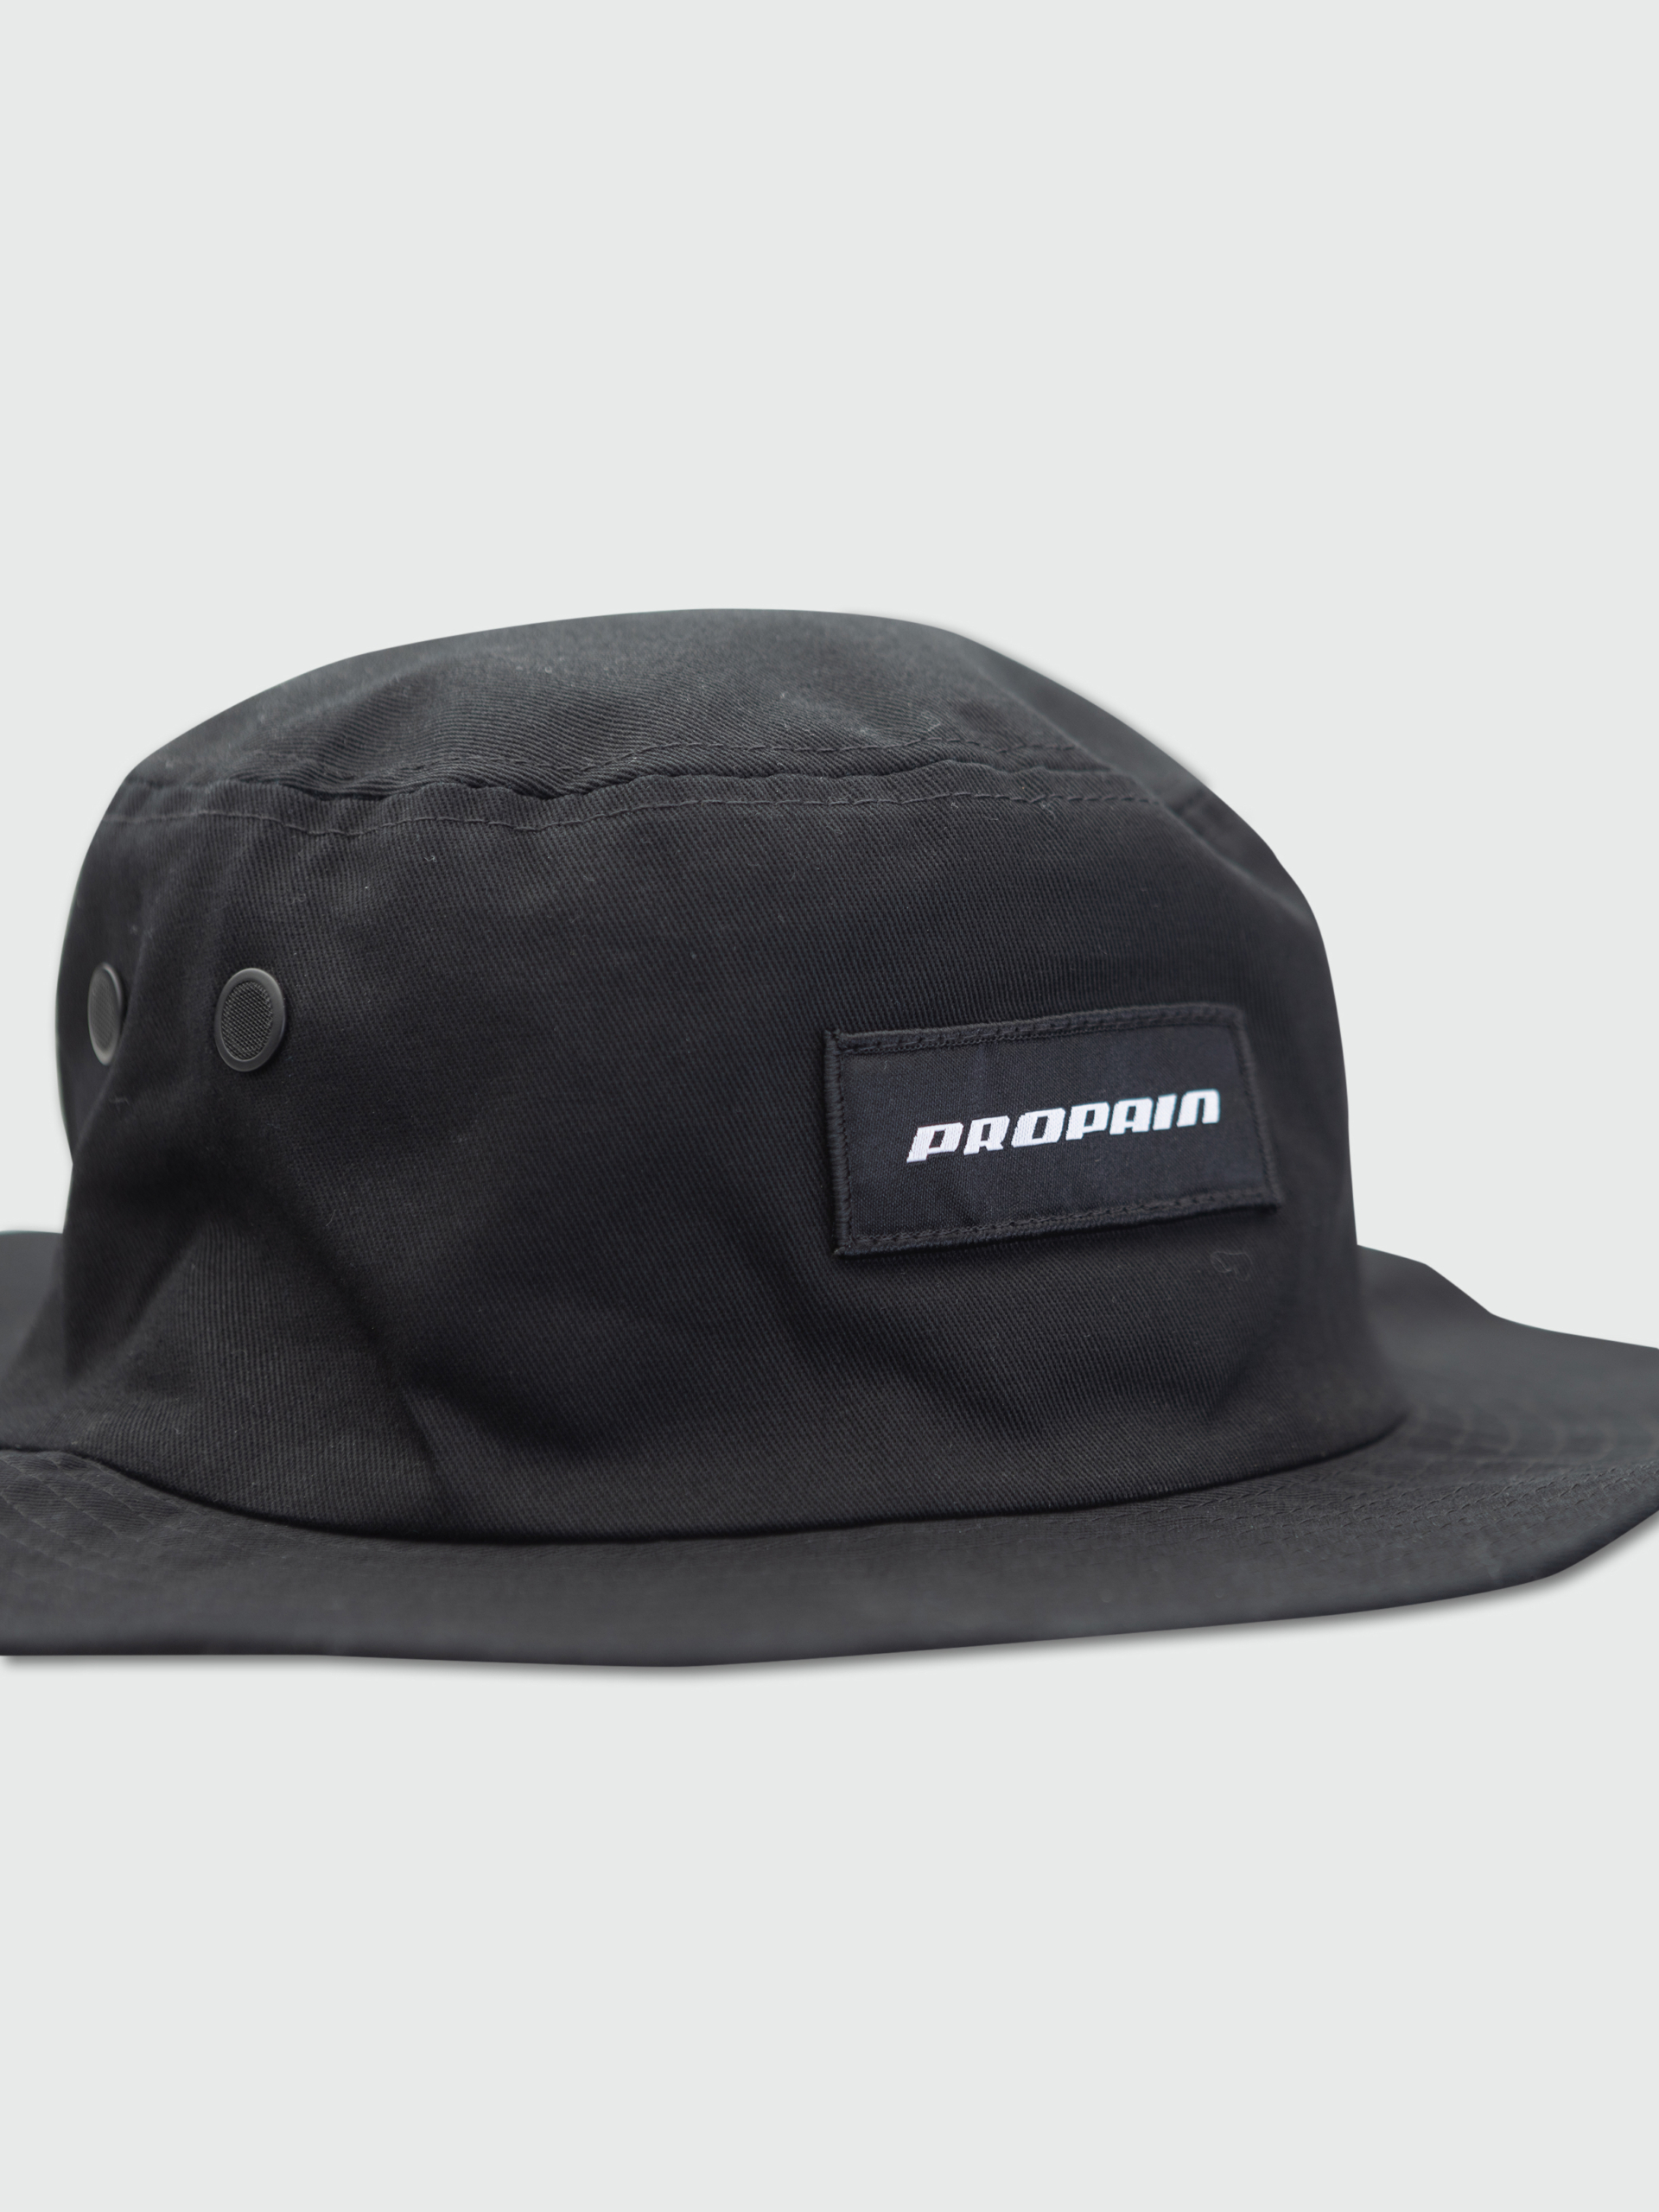 Propain Shaper Hat • PROPAIN Bicycles North America